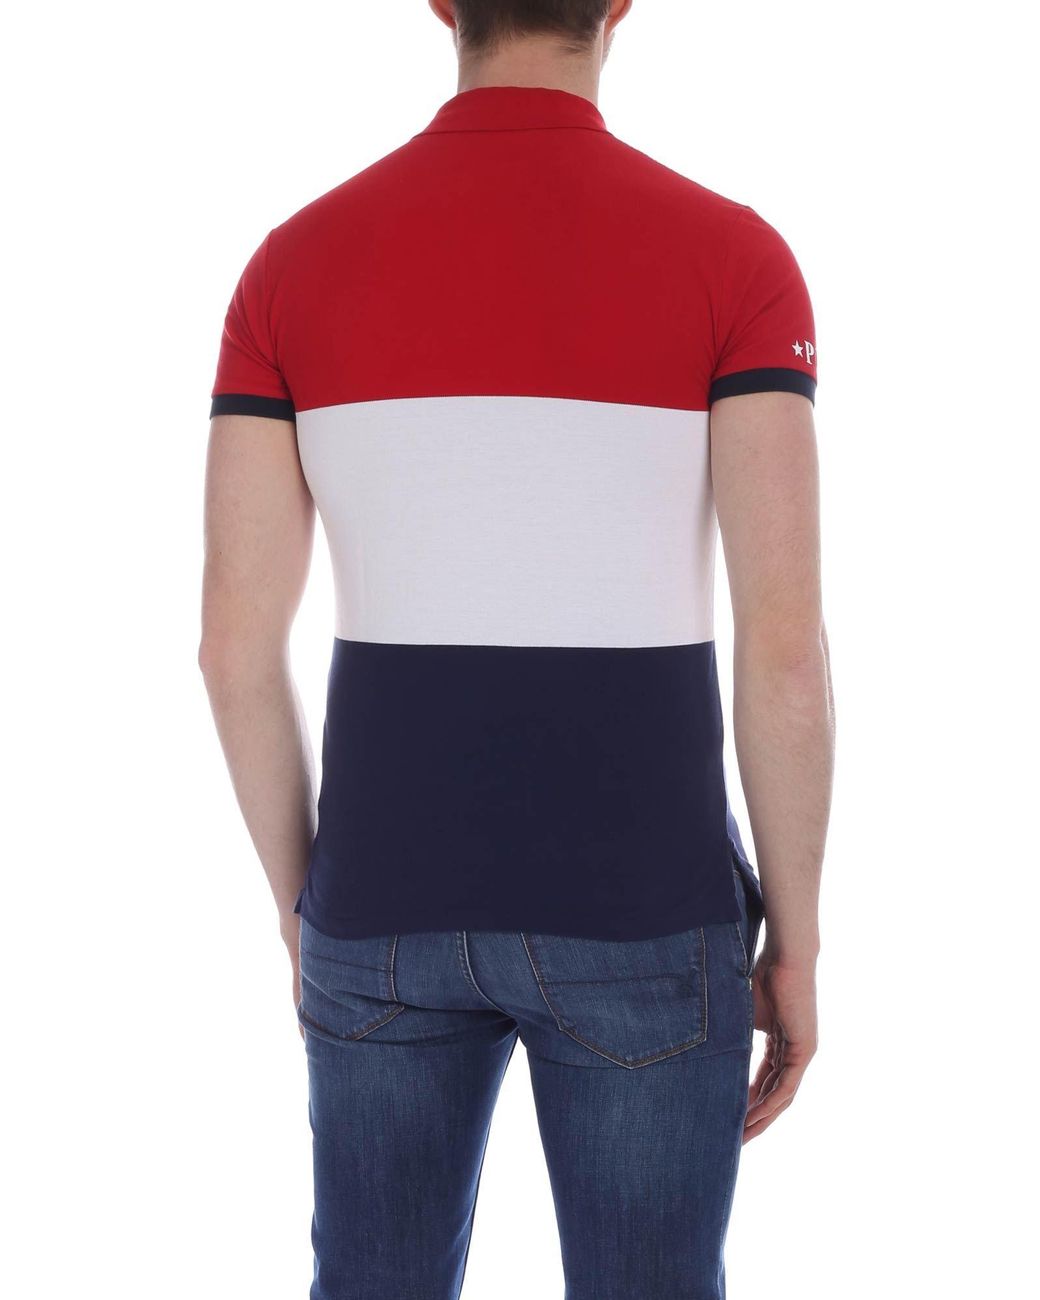 polo red white and blue